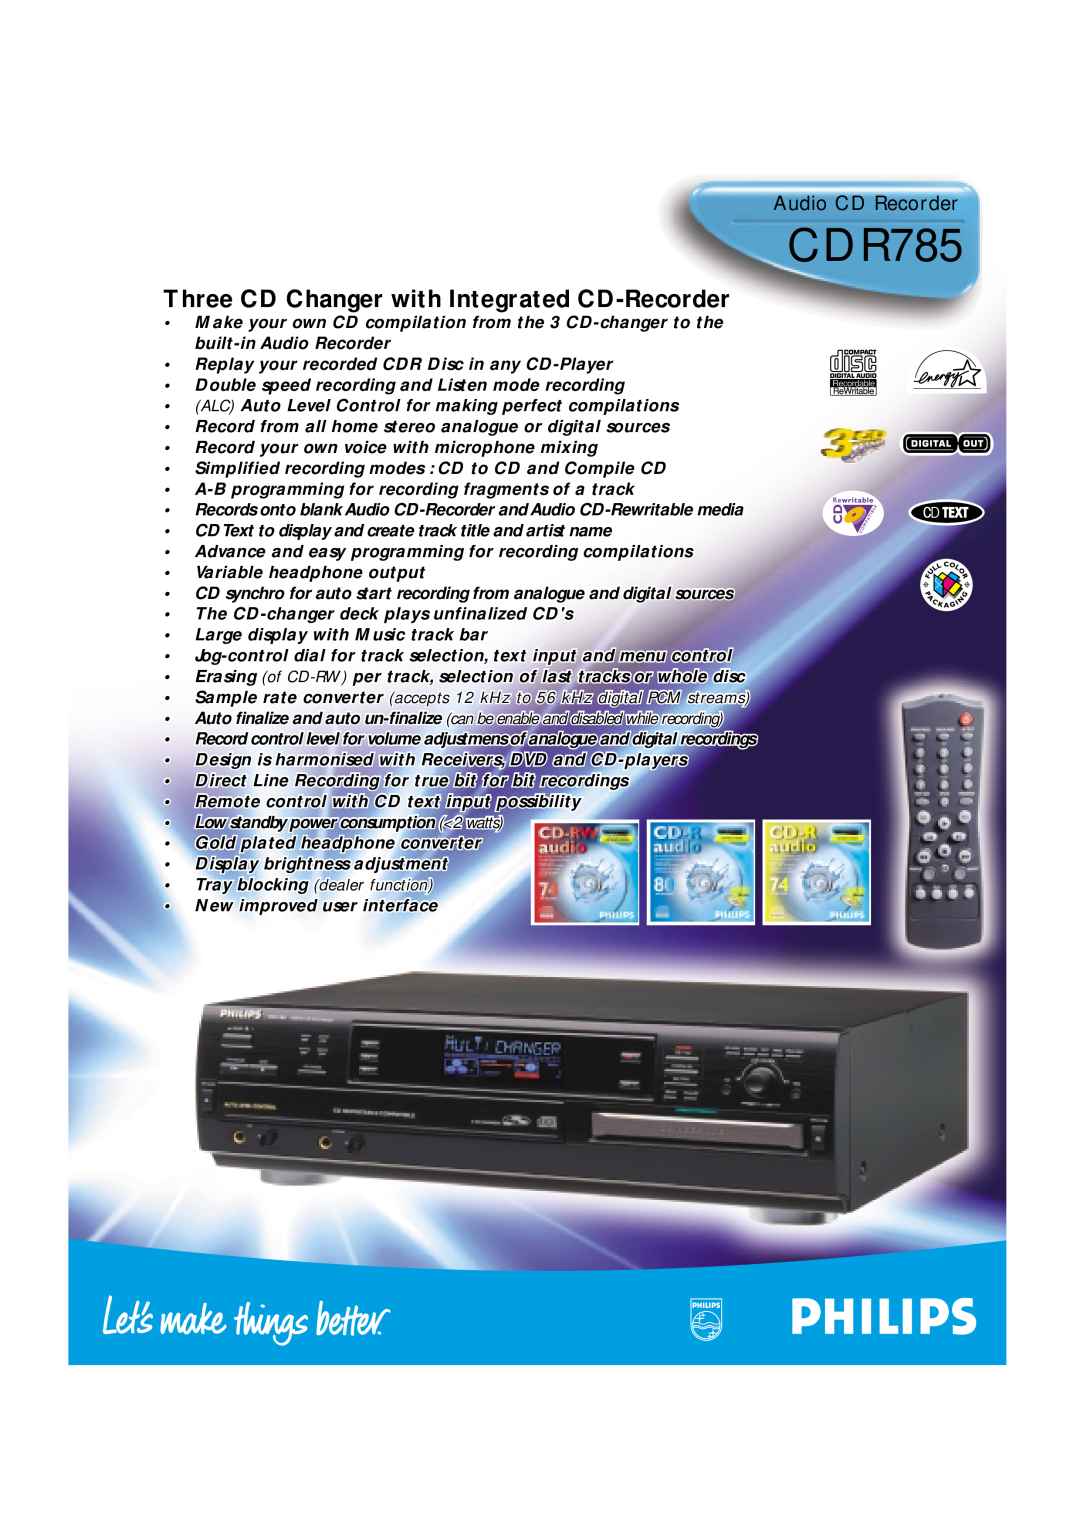 Philips CDR785 manual Audio CD Recorder 